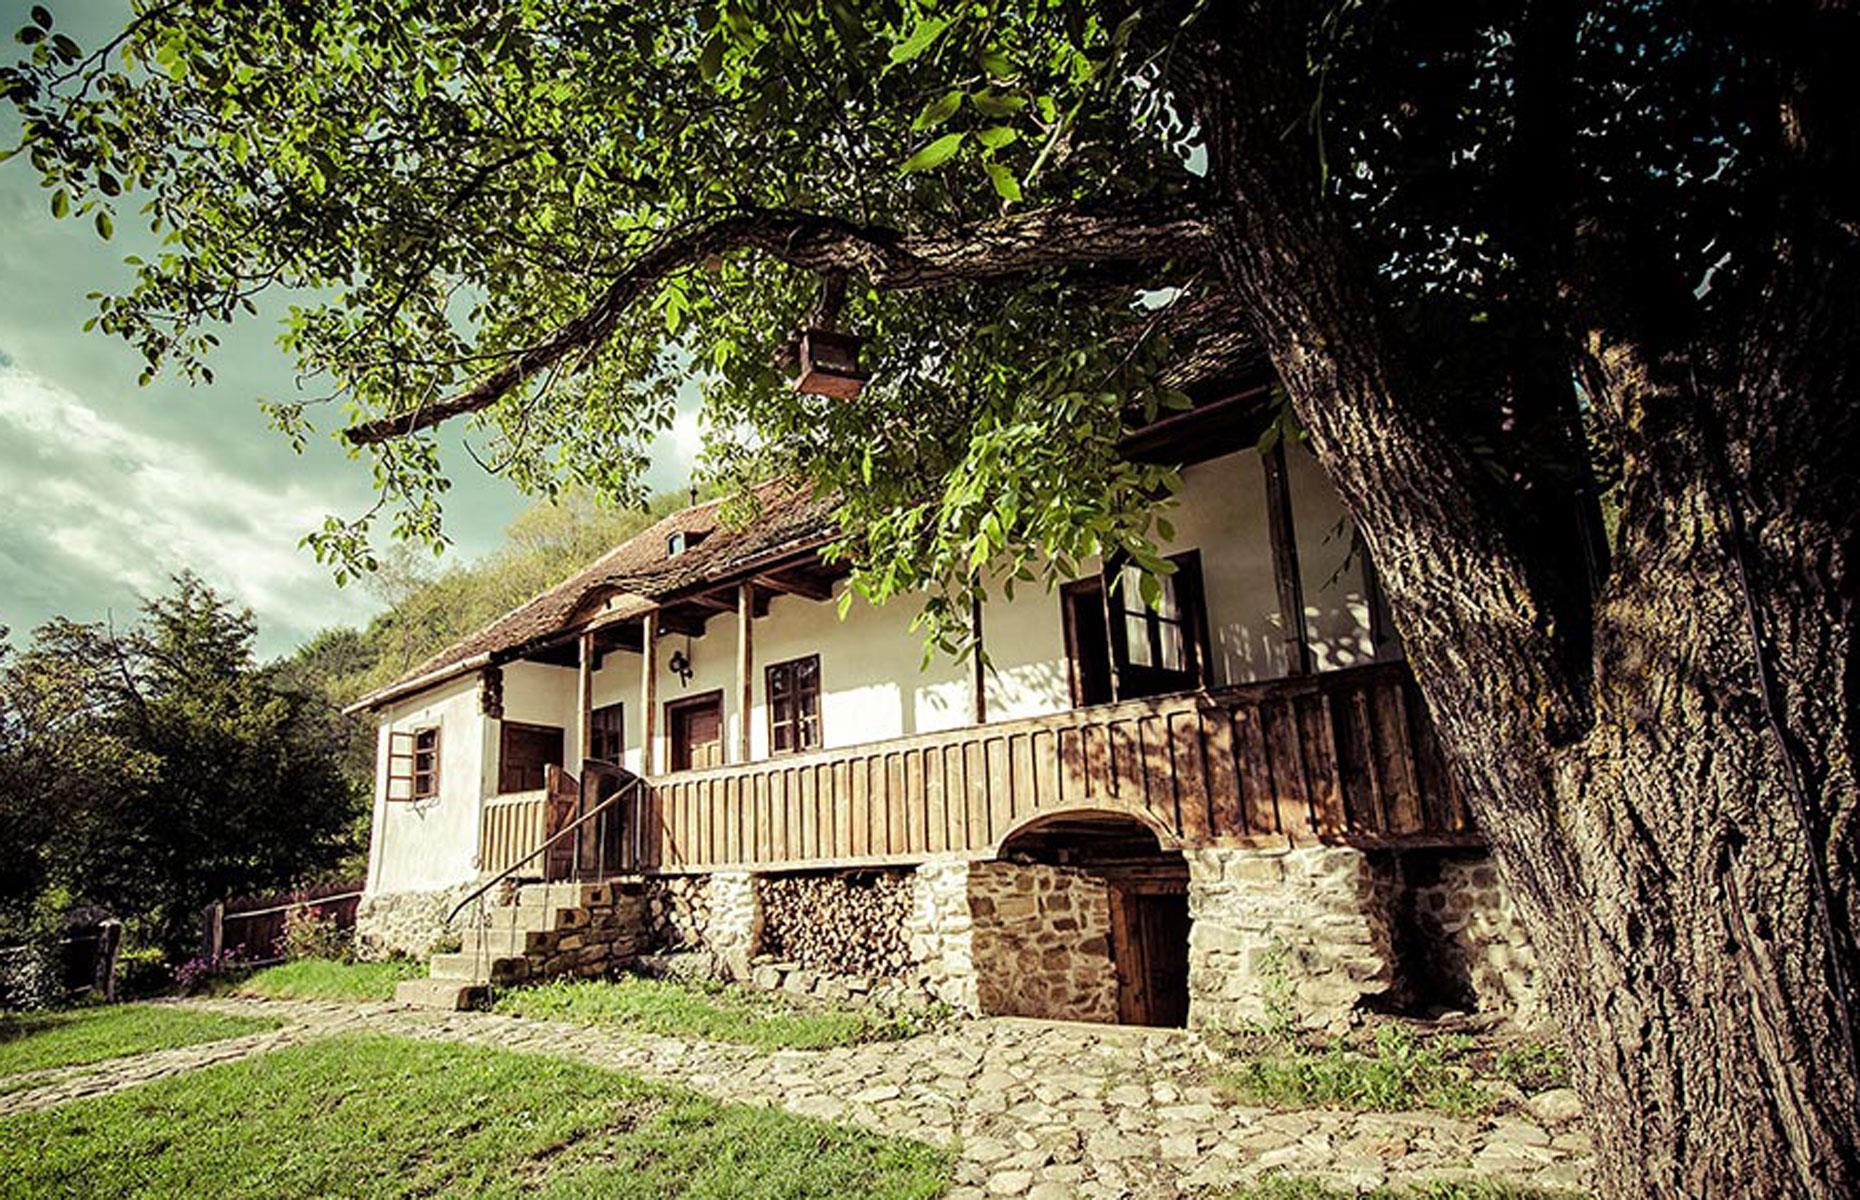 <p>If you fancy something not quite so quintessentially British, you might want to check out King Charles’ properties in Transylvania, famed for its association with Count Dracula and brutal real-life ruler Vlad the Impaler.</p>  <p>The former Prince first fell in love with the region in 1998, shortly after the death of Princess Diana, and was so smitten with the area that he bought two properties there. </p>